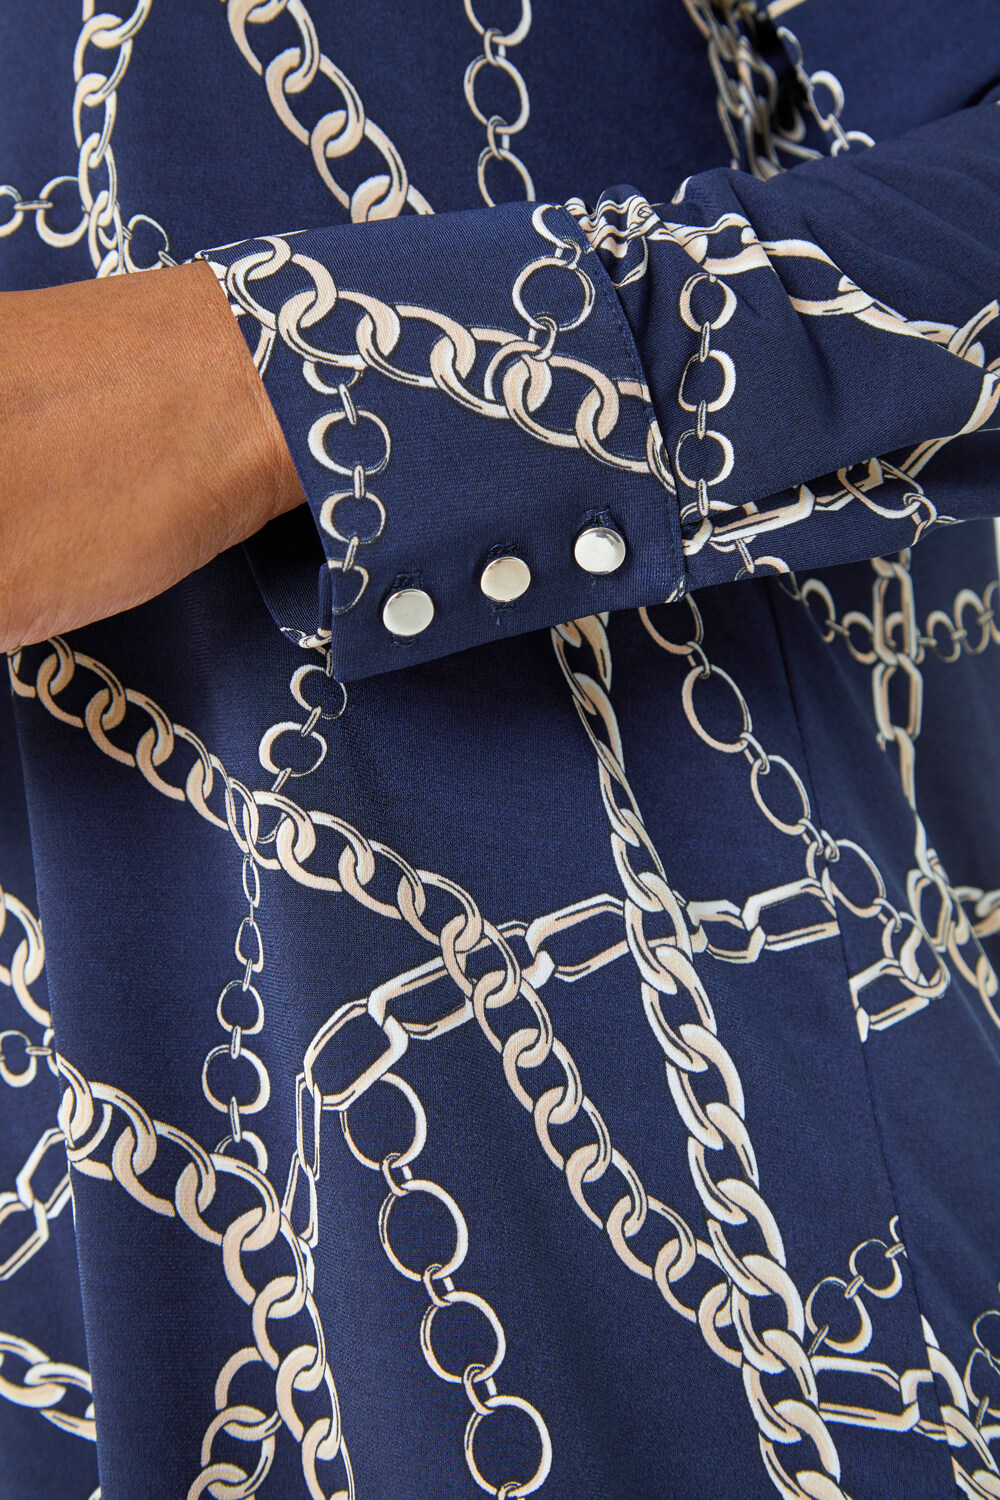 Navy  Petite Chain Print Blouse, Image 5 of 5